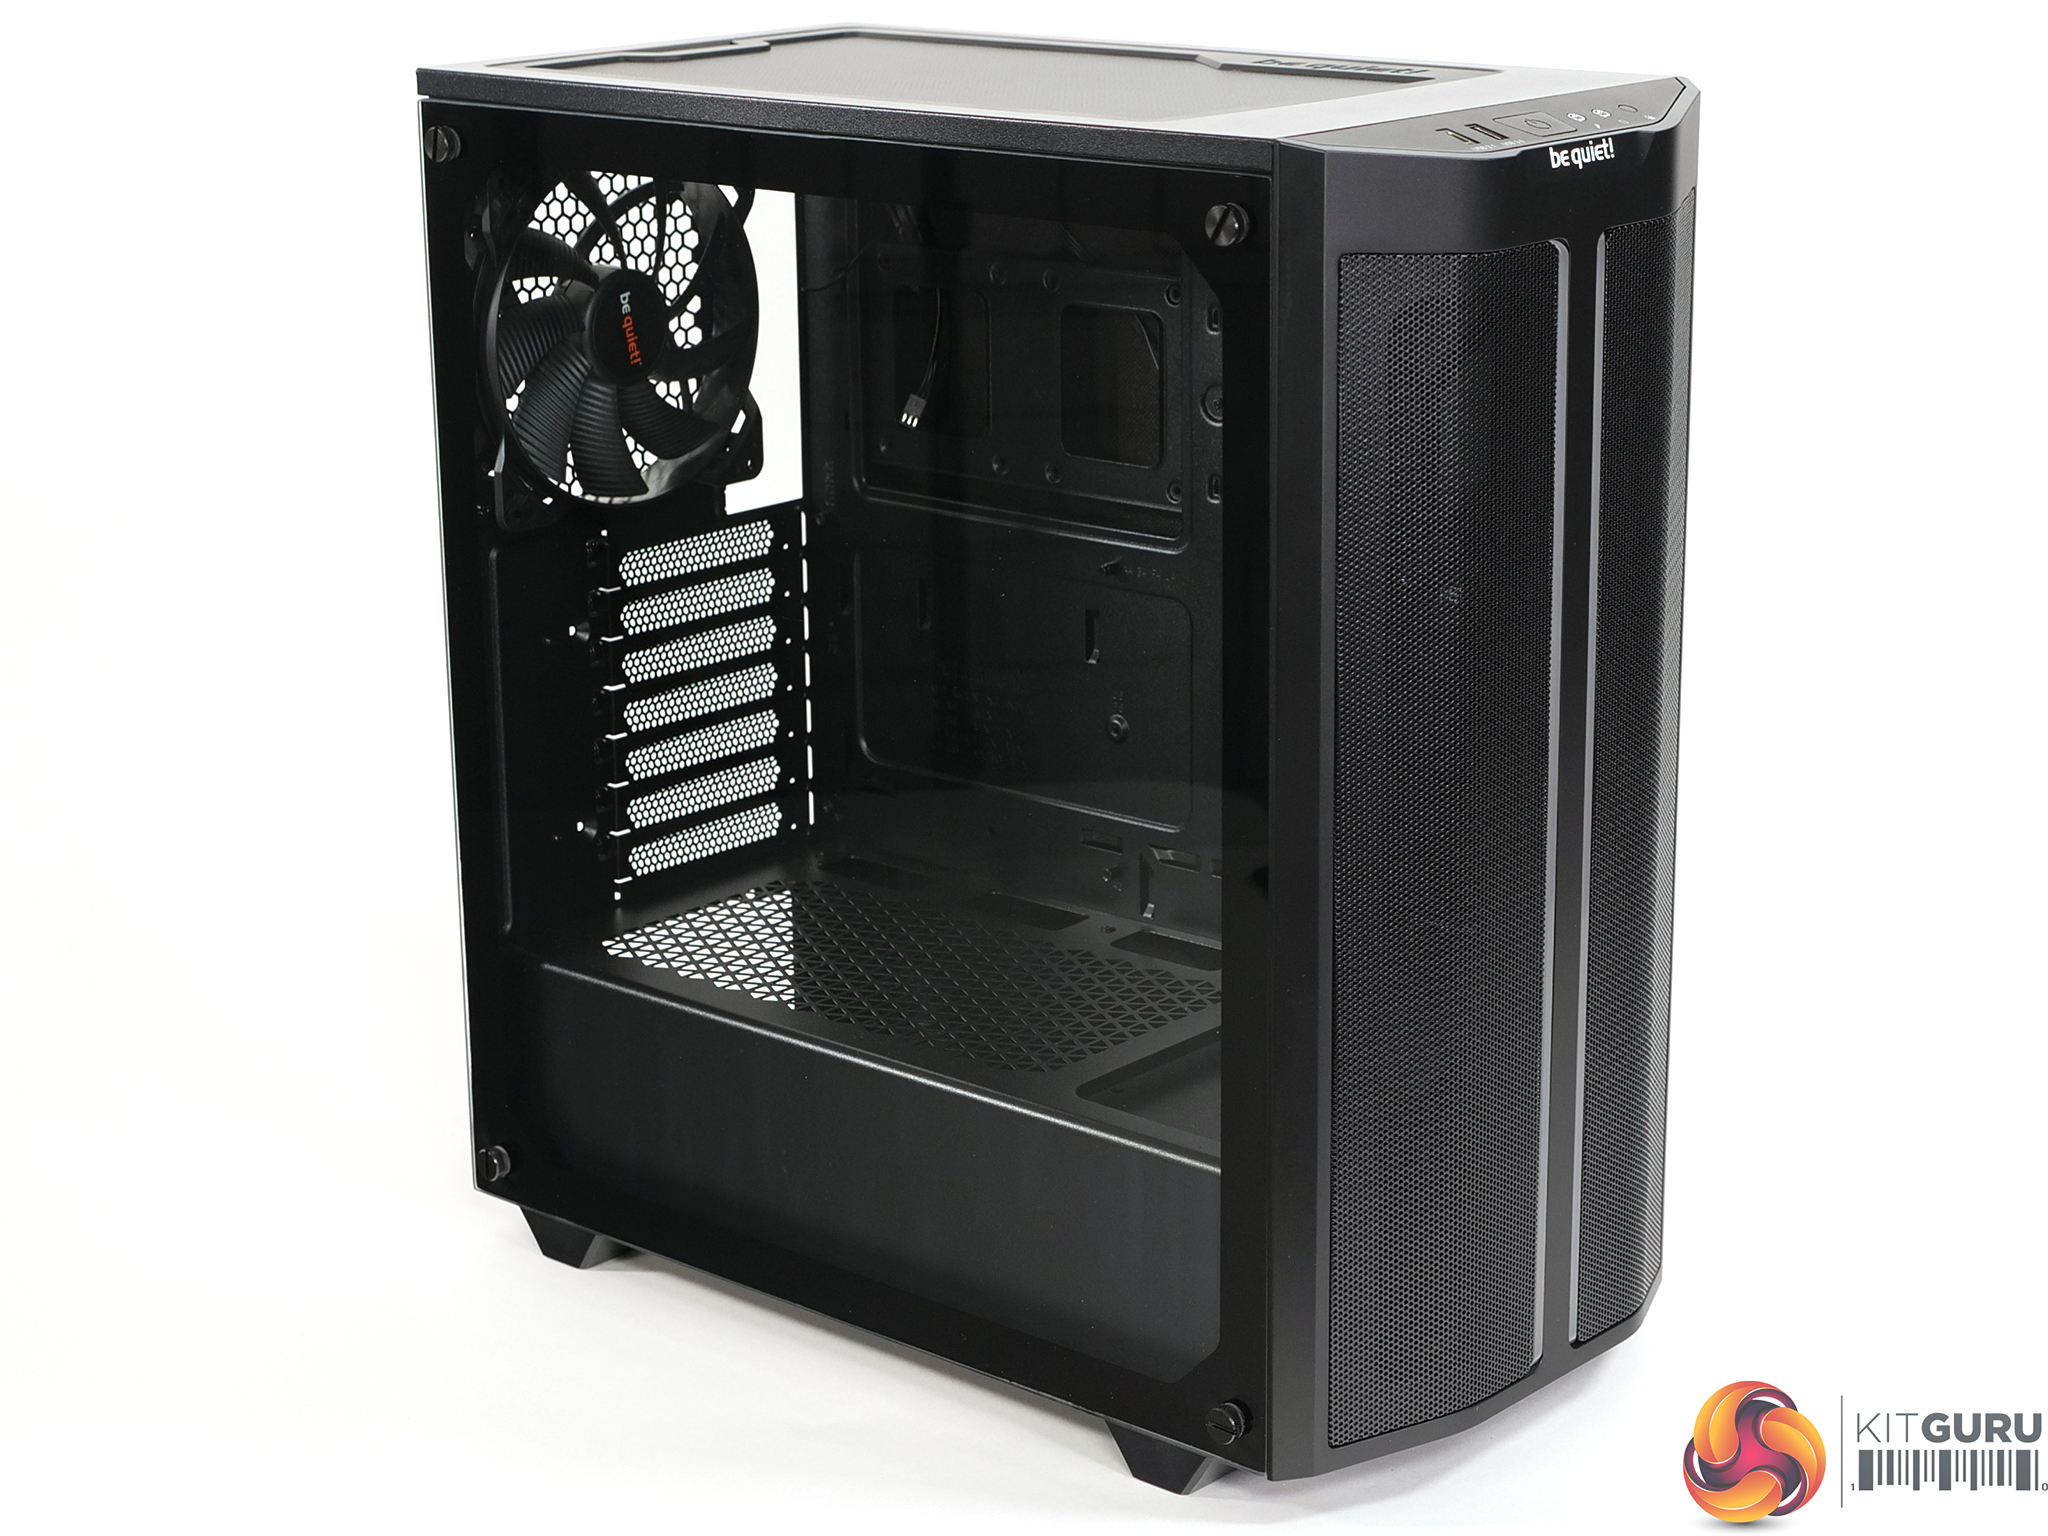  be quiet! Pure Base 500DX ATX Midi Tower PC case, ARGB, 3  Pre-Installed Pure Wings 2 Fans, Tempered Glass Window, White